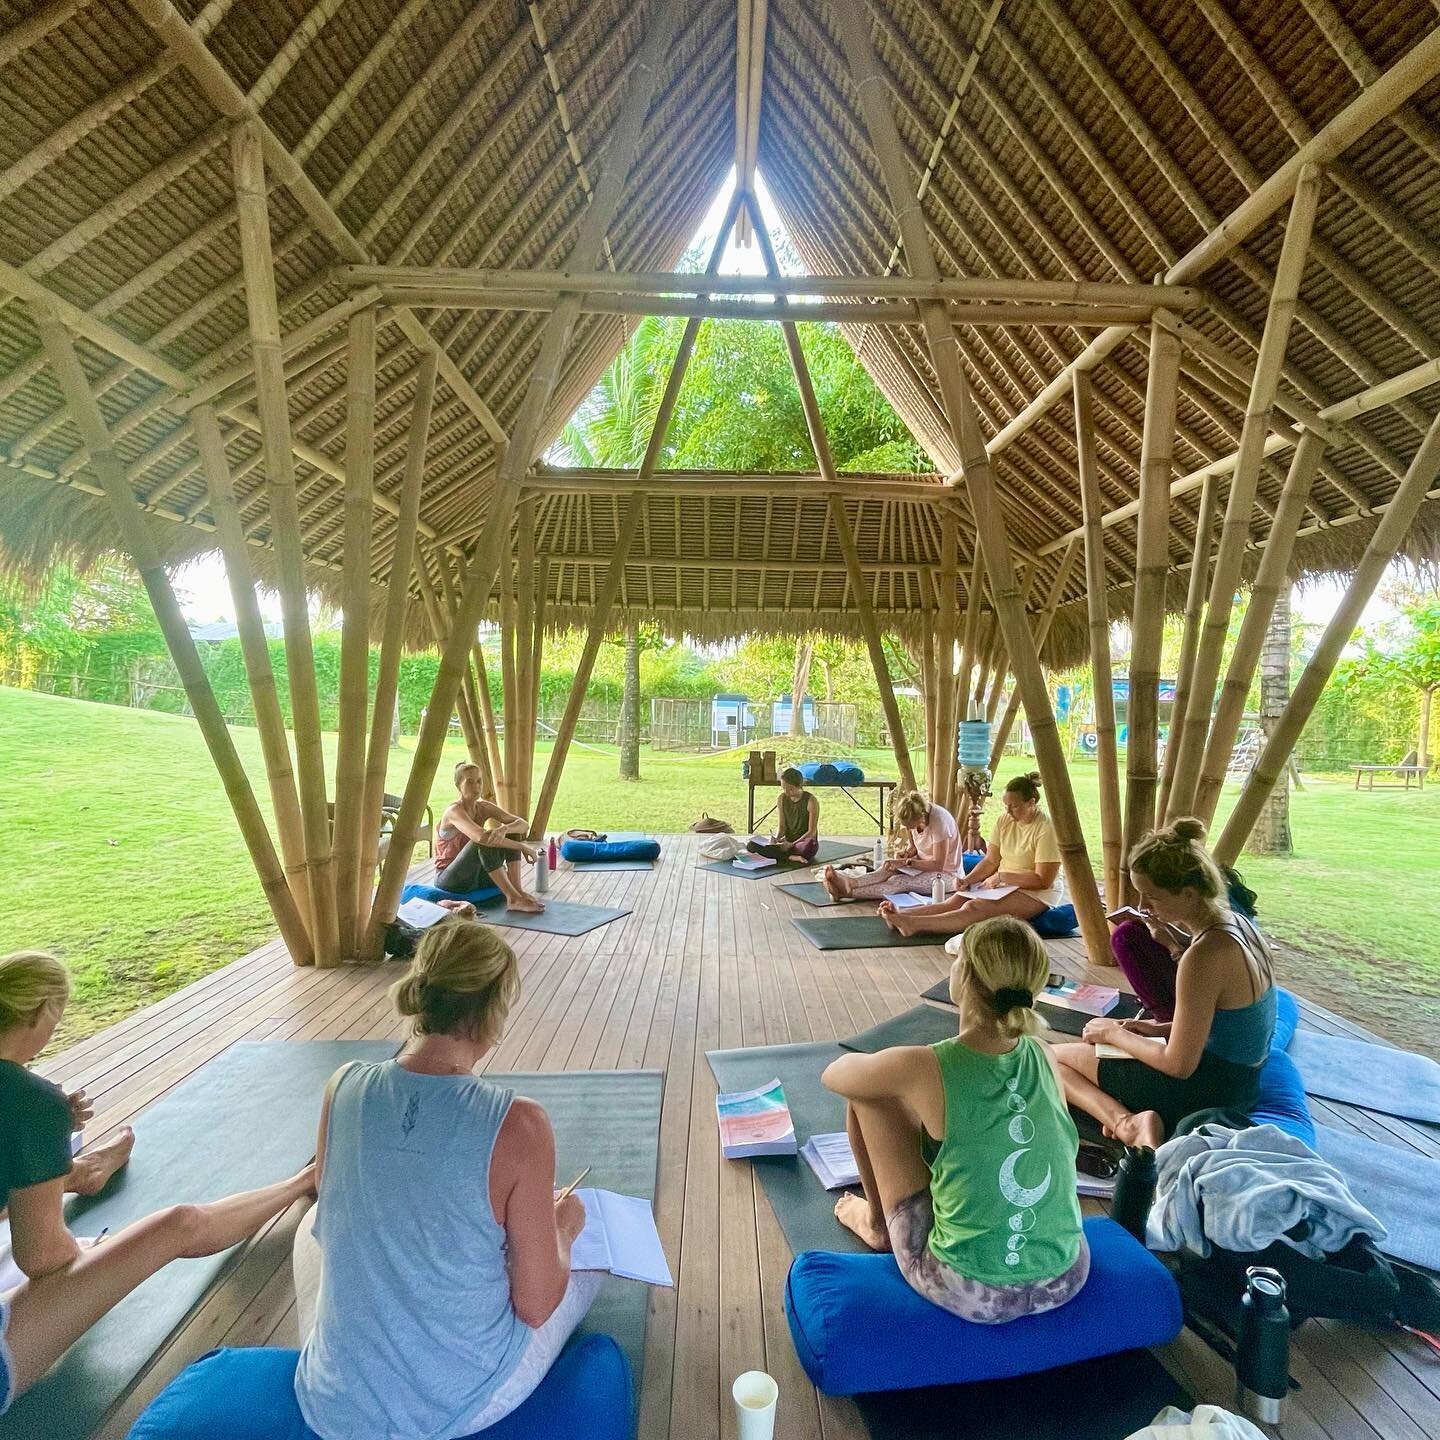 Different yoga spaces can bring different vibes. Learning in each of the yoga shalas at Komune brings about different experiences and growth. 

We are learning so much this week on energy and how it moves through our beings. 

The deeper education we